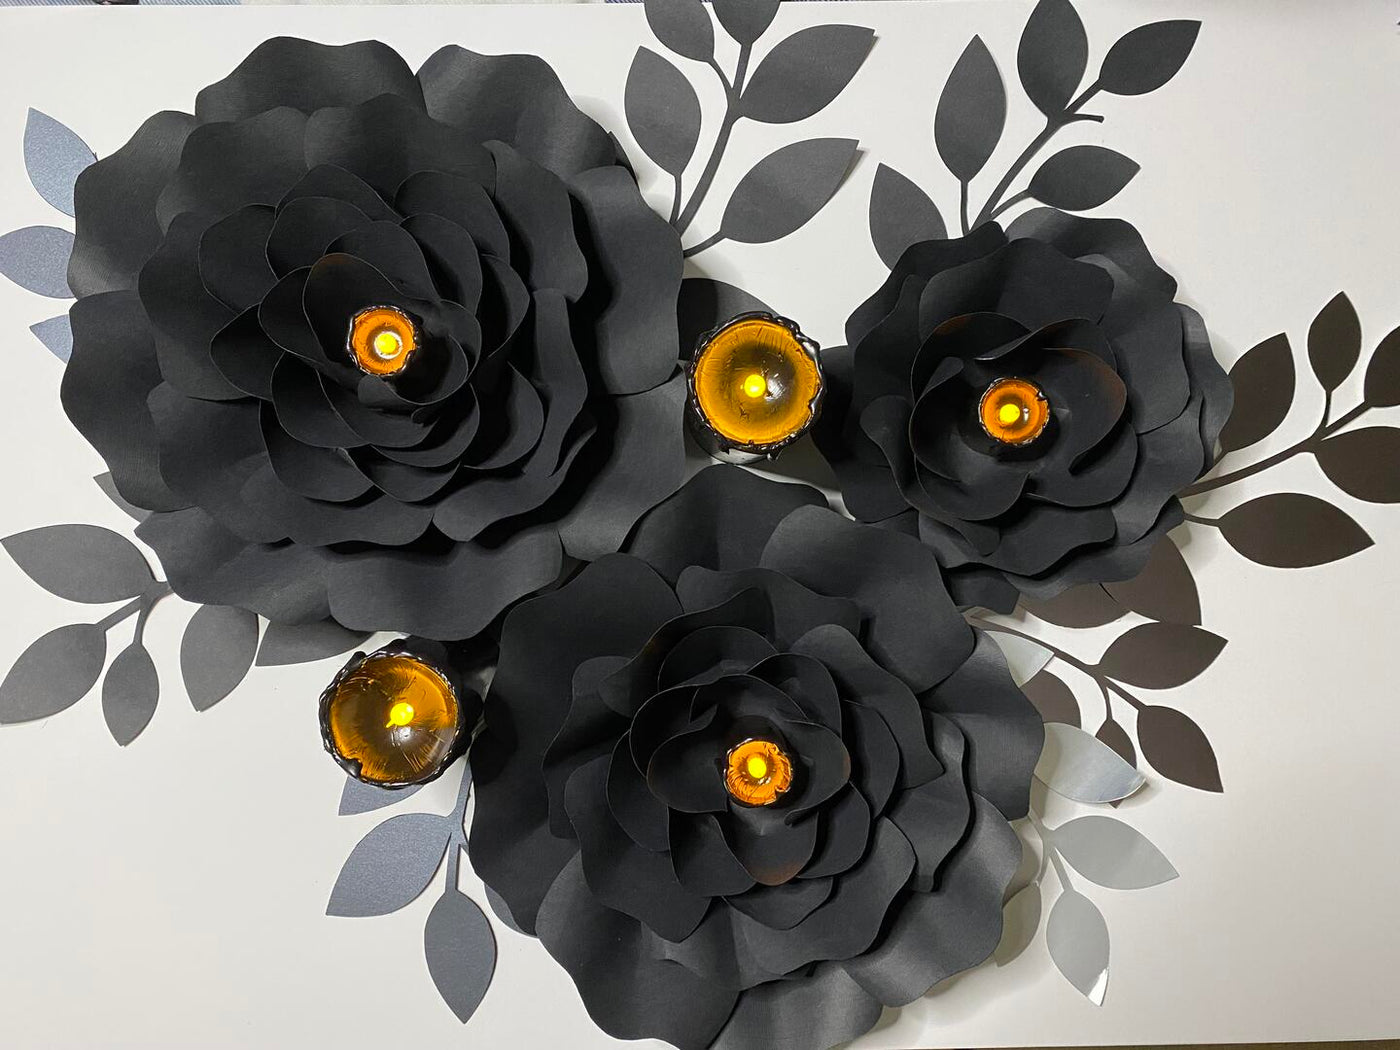 giant paper flowers made with Bazzill cardstock in Raven